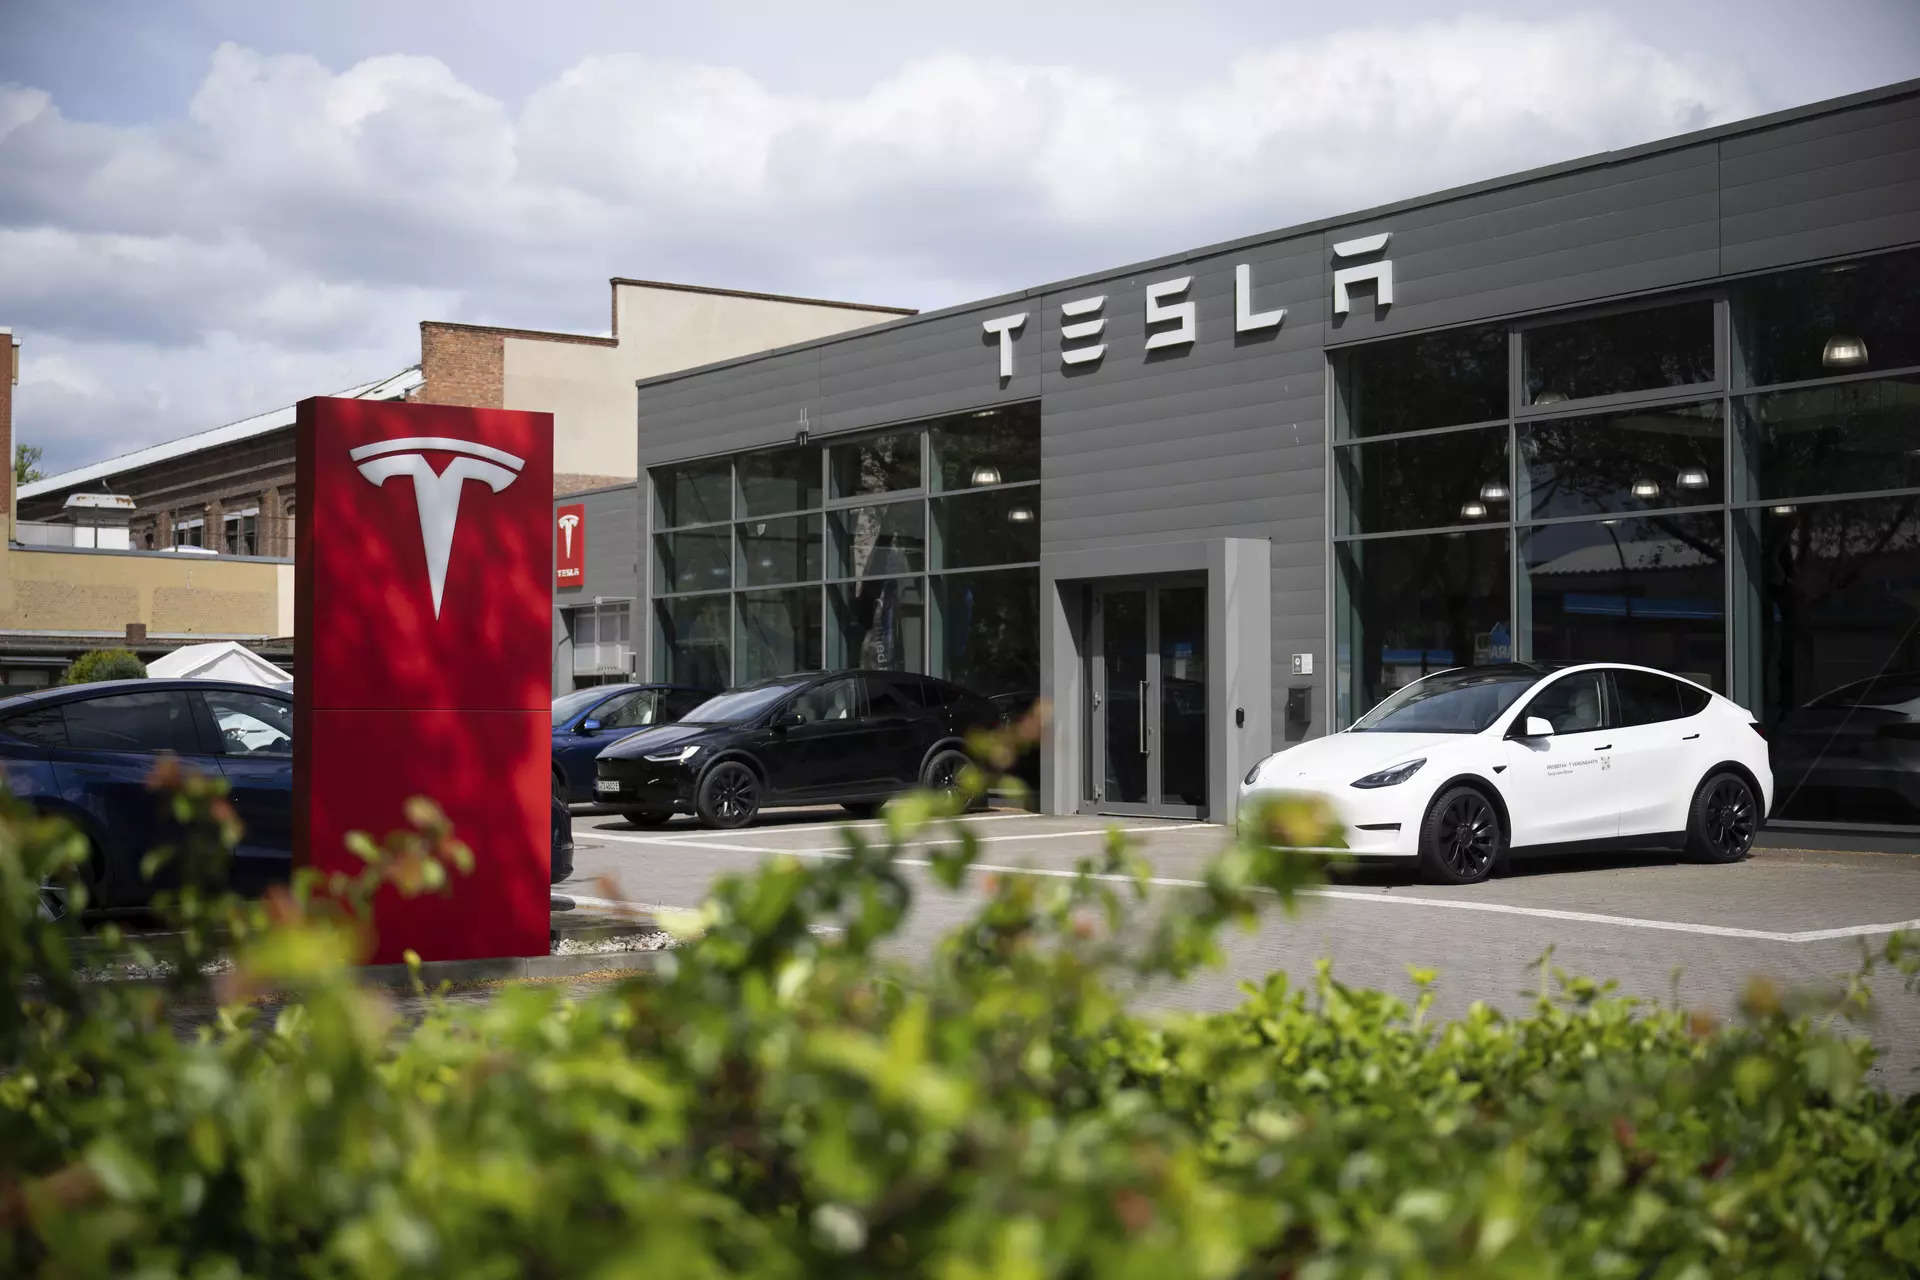 <p>The Tesla Inc. counsel sought urgent action against Tesla Power's use of the Tesla trademark and its passing off, citing potential damage to their brand and business interests in India.</p>